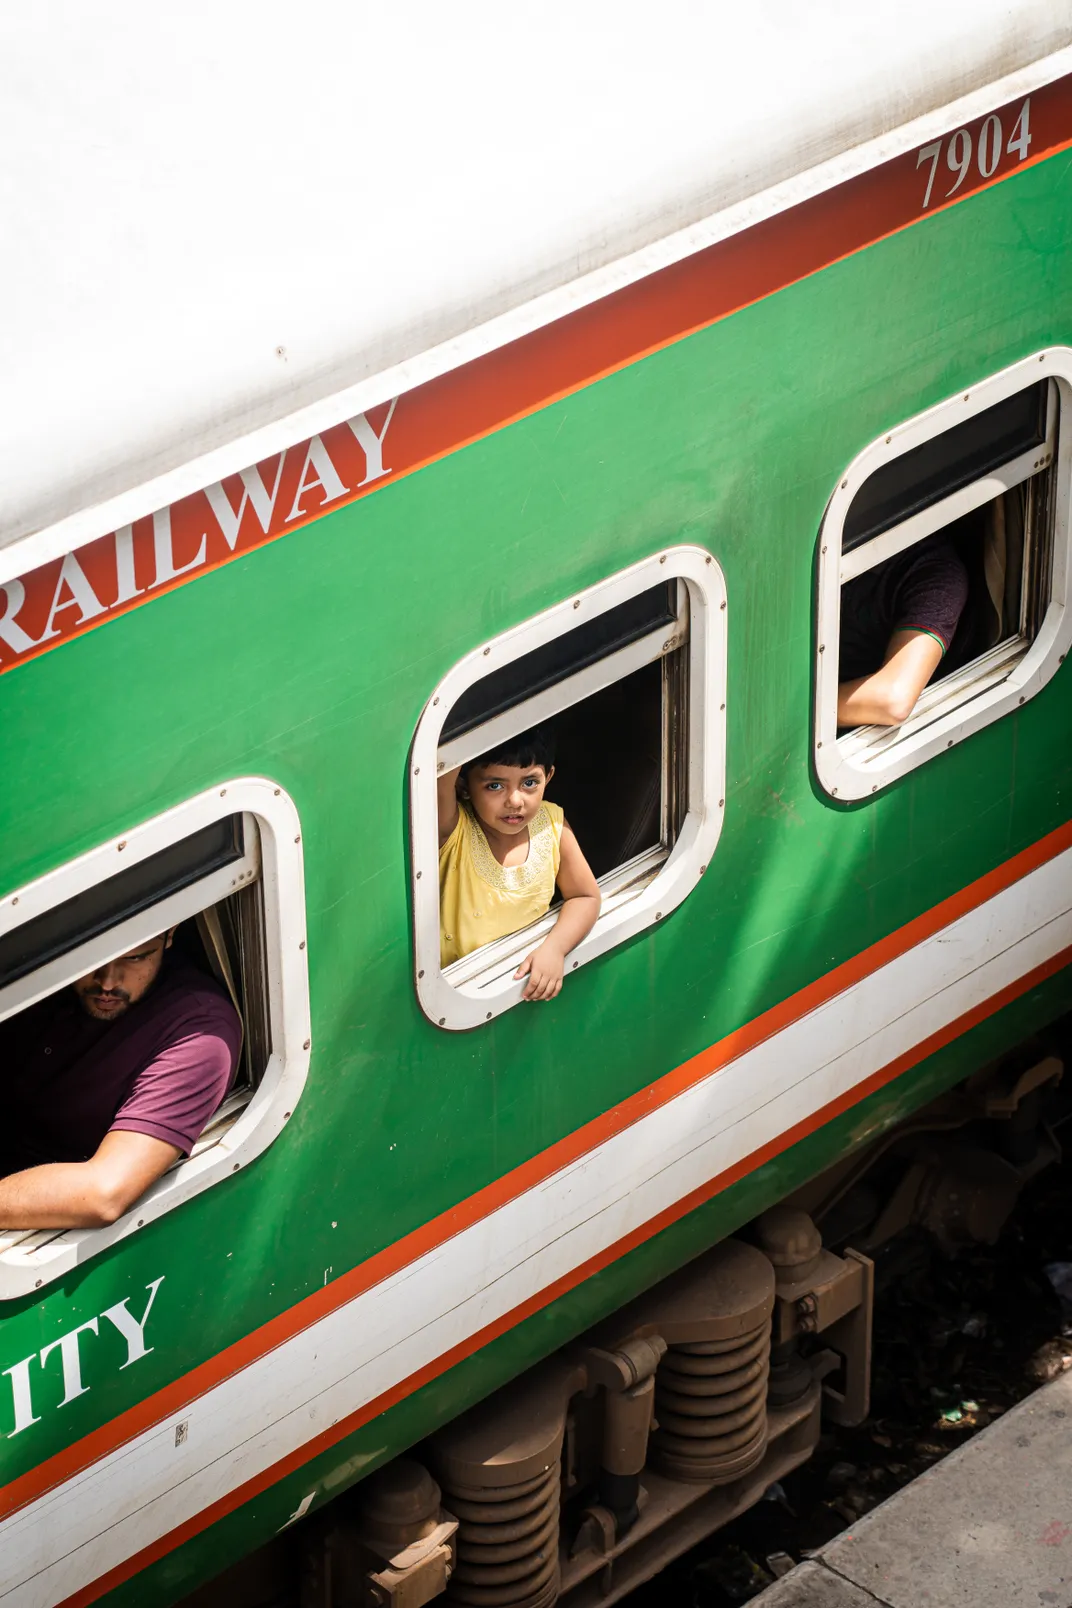 3 - A young girl traveling with her parents spots a camera while looking through the window of a train car.